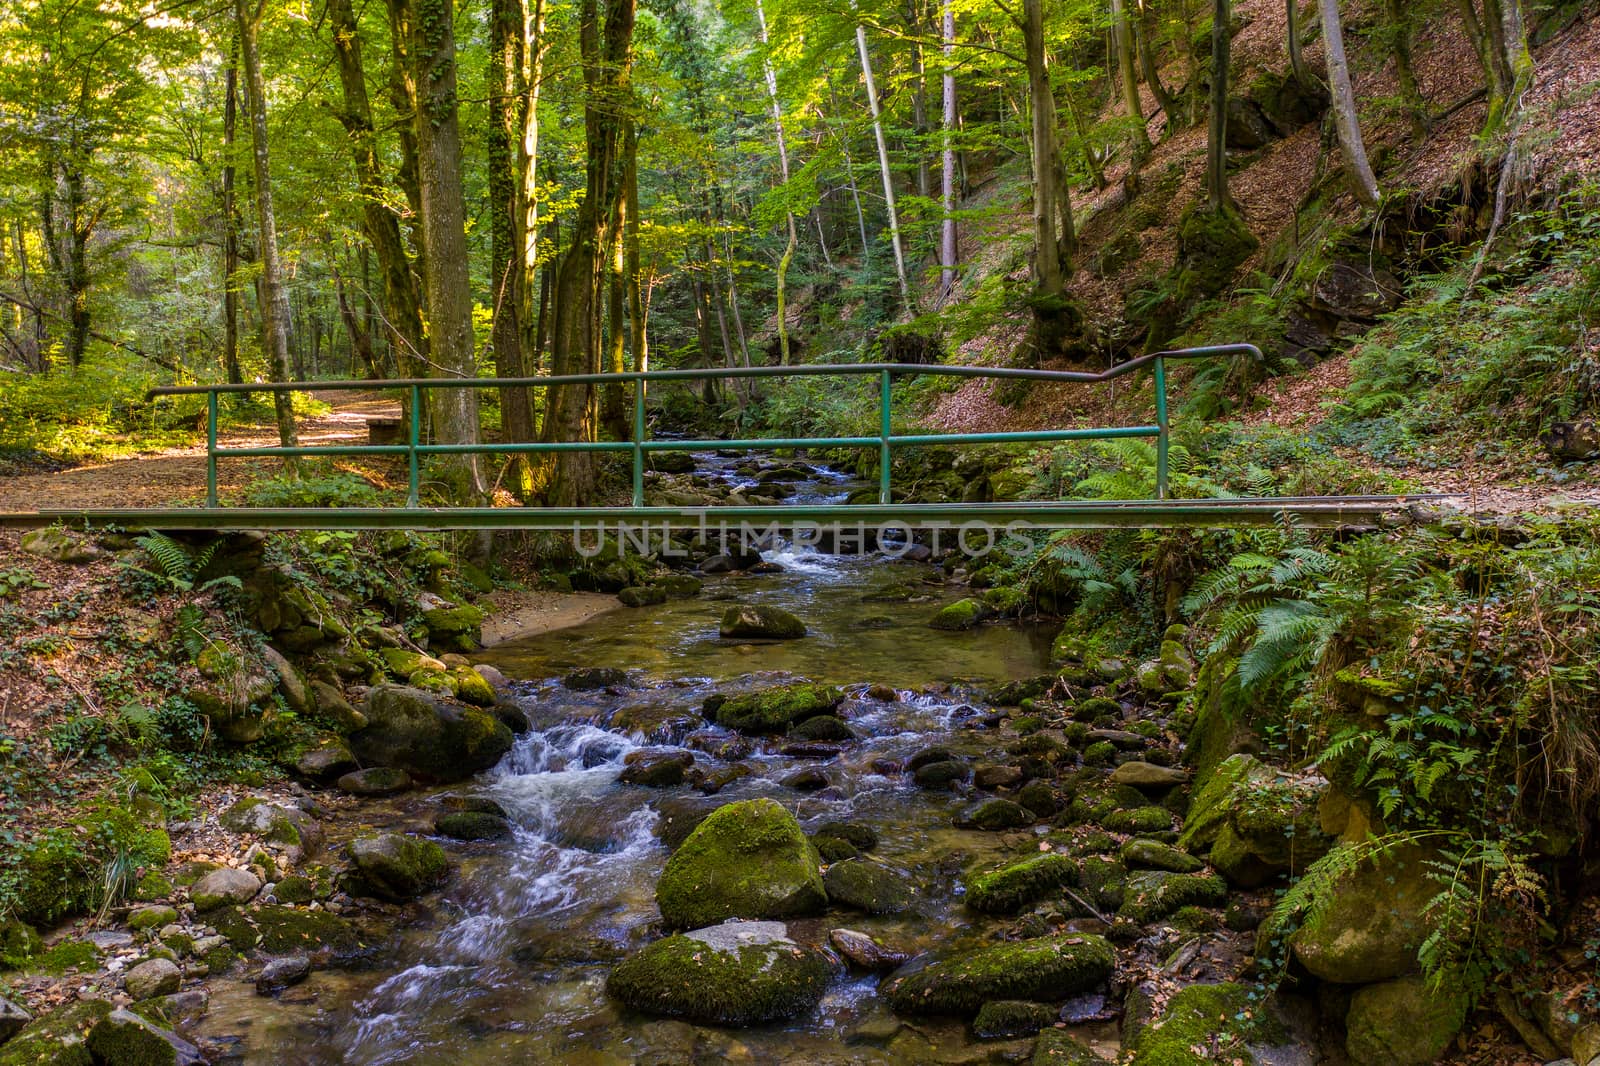 Mountain river flowing over rocks and boulders in forest, iron bridge crossing, Bistriski Vintgar gorge on Pohorje mountain, Slovenia, hiking and outdoor tourism landmark, ecology clean water concept